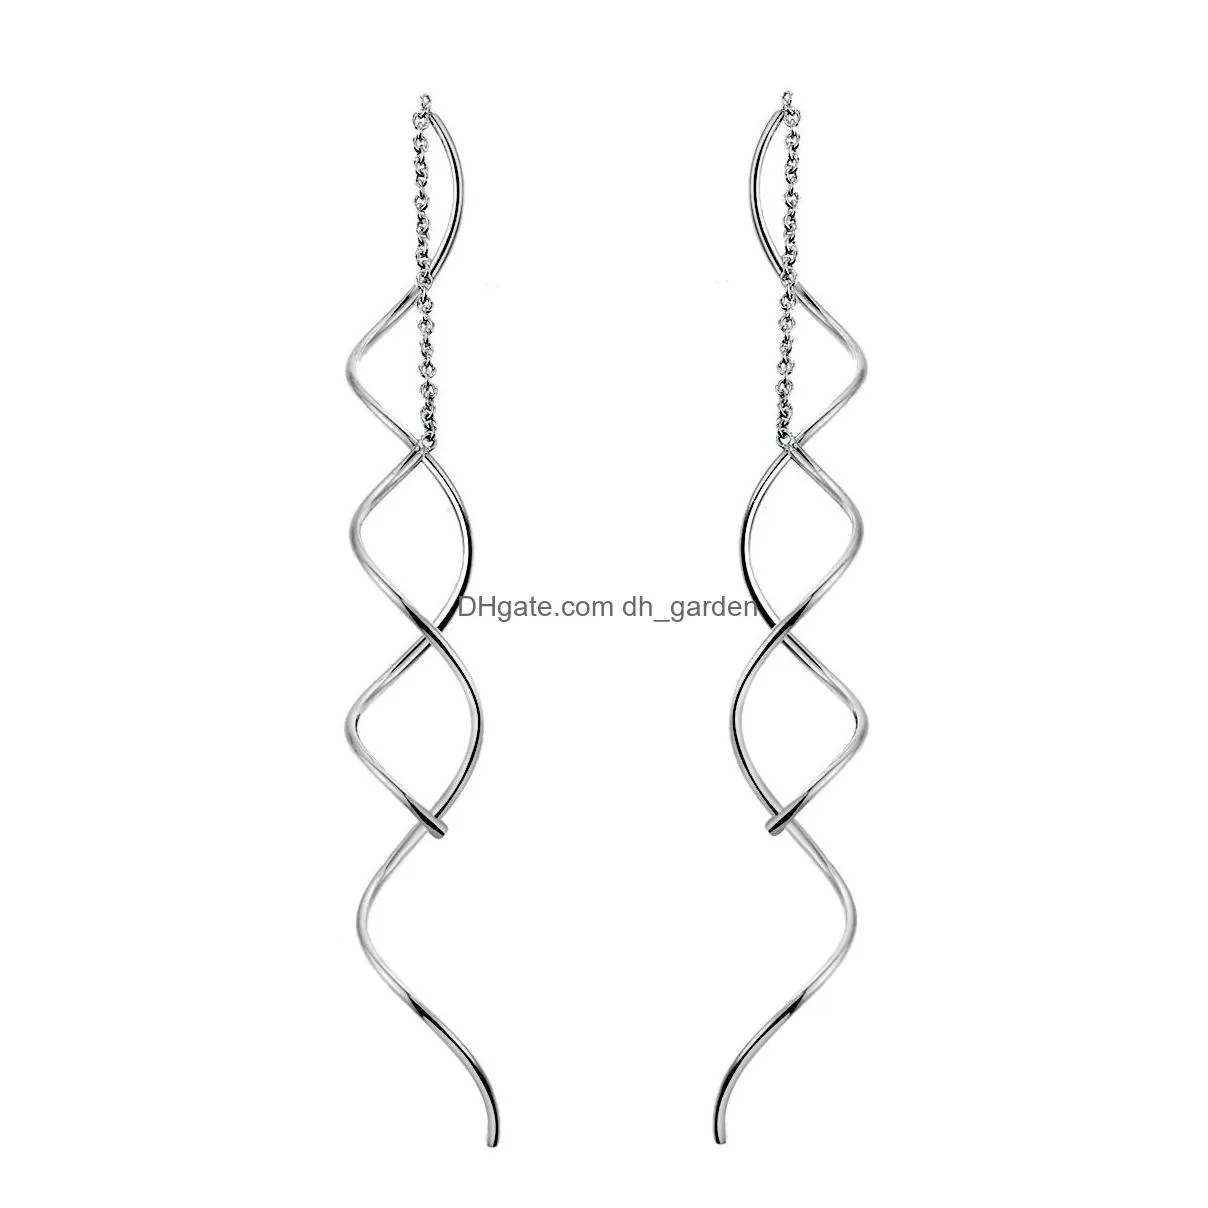 Unique Twisted Bar Long Line Chain Earrings white/Rose Gold Color Fashion Drop/Dangle Earring Jewelry Ear Cuff For Women DFE243